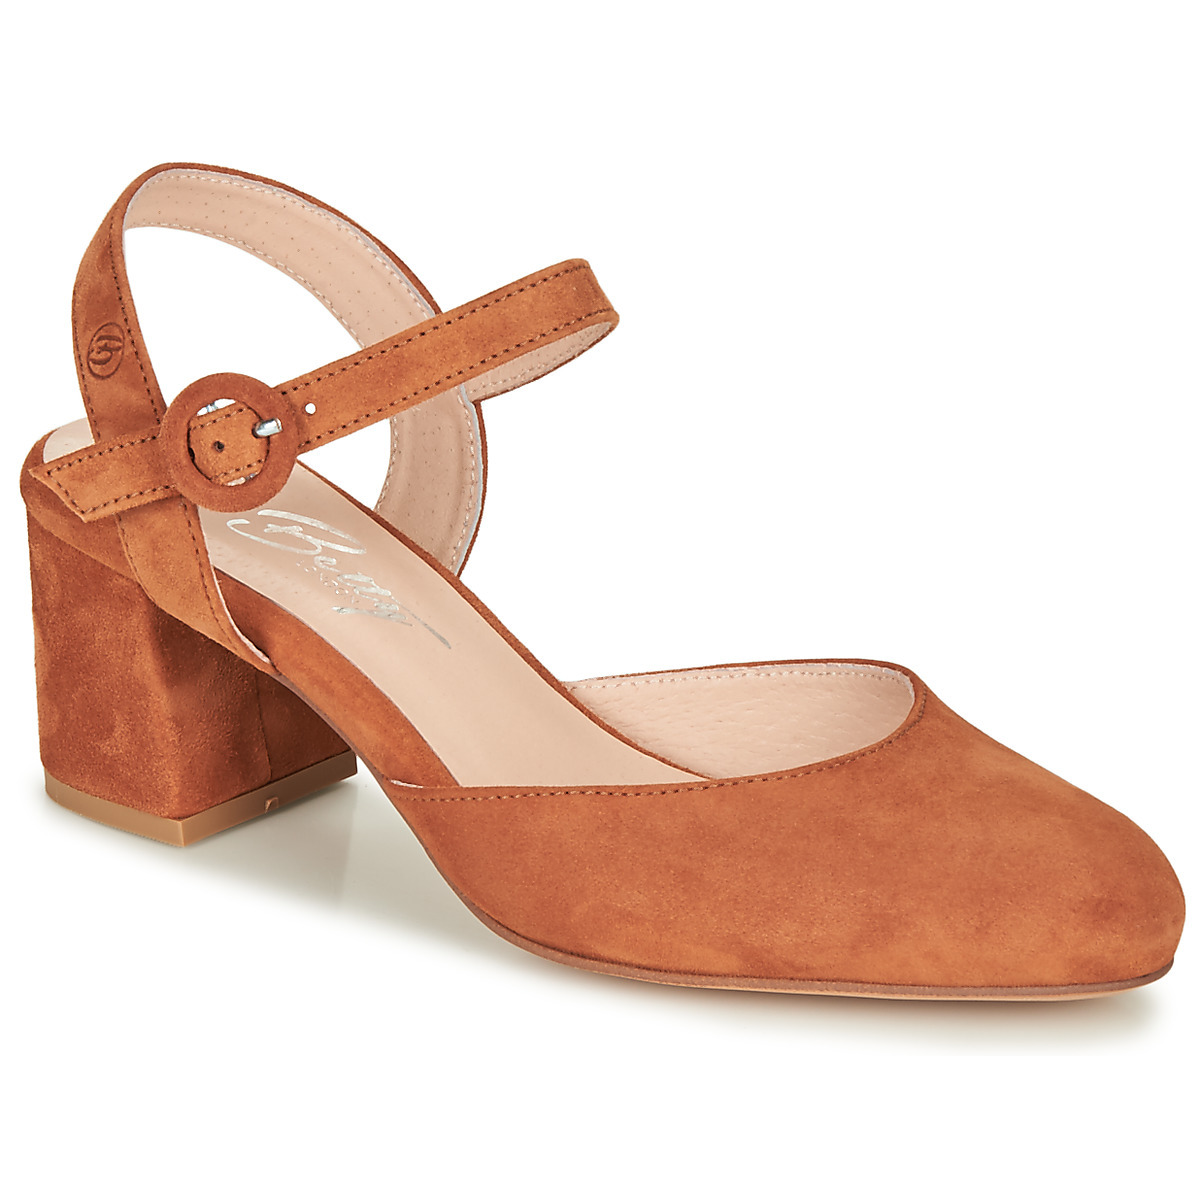 Betty London - Woman Pumps in Brown from Spartoo GOOFASH